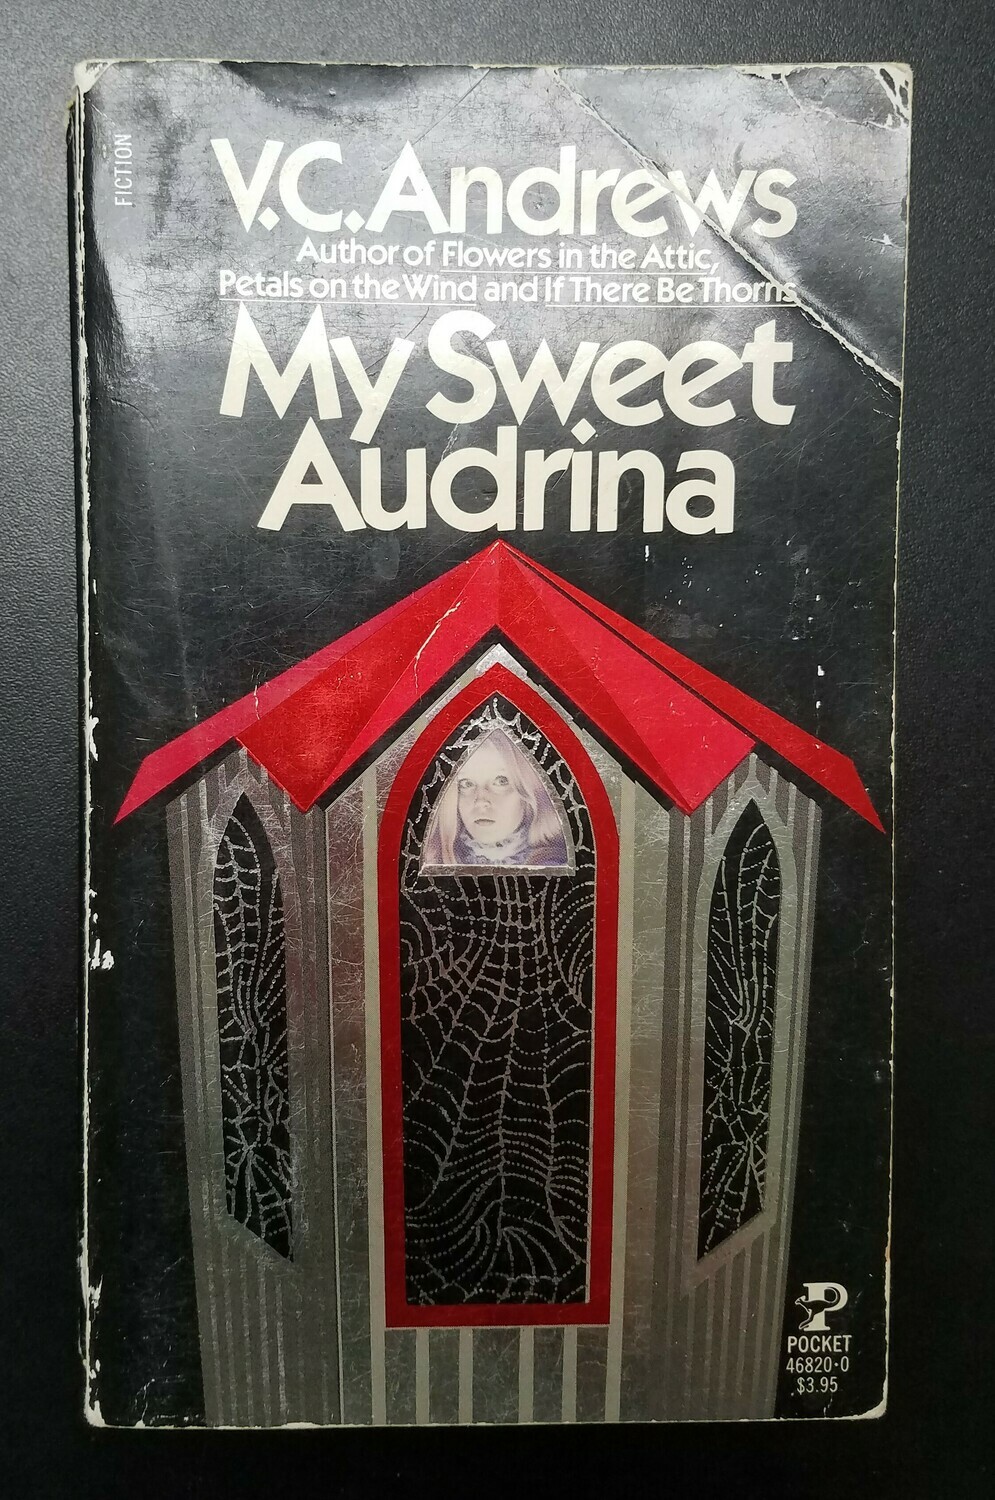 My Sweet Audrina by V.C. Andrews